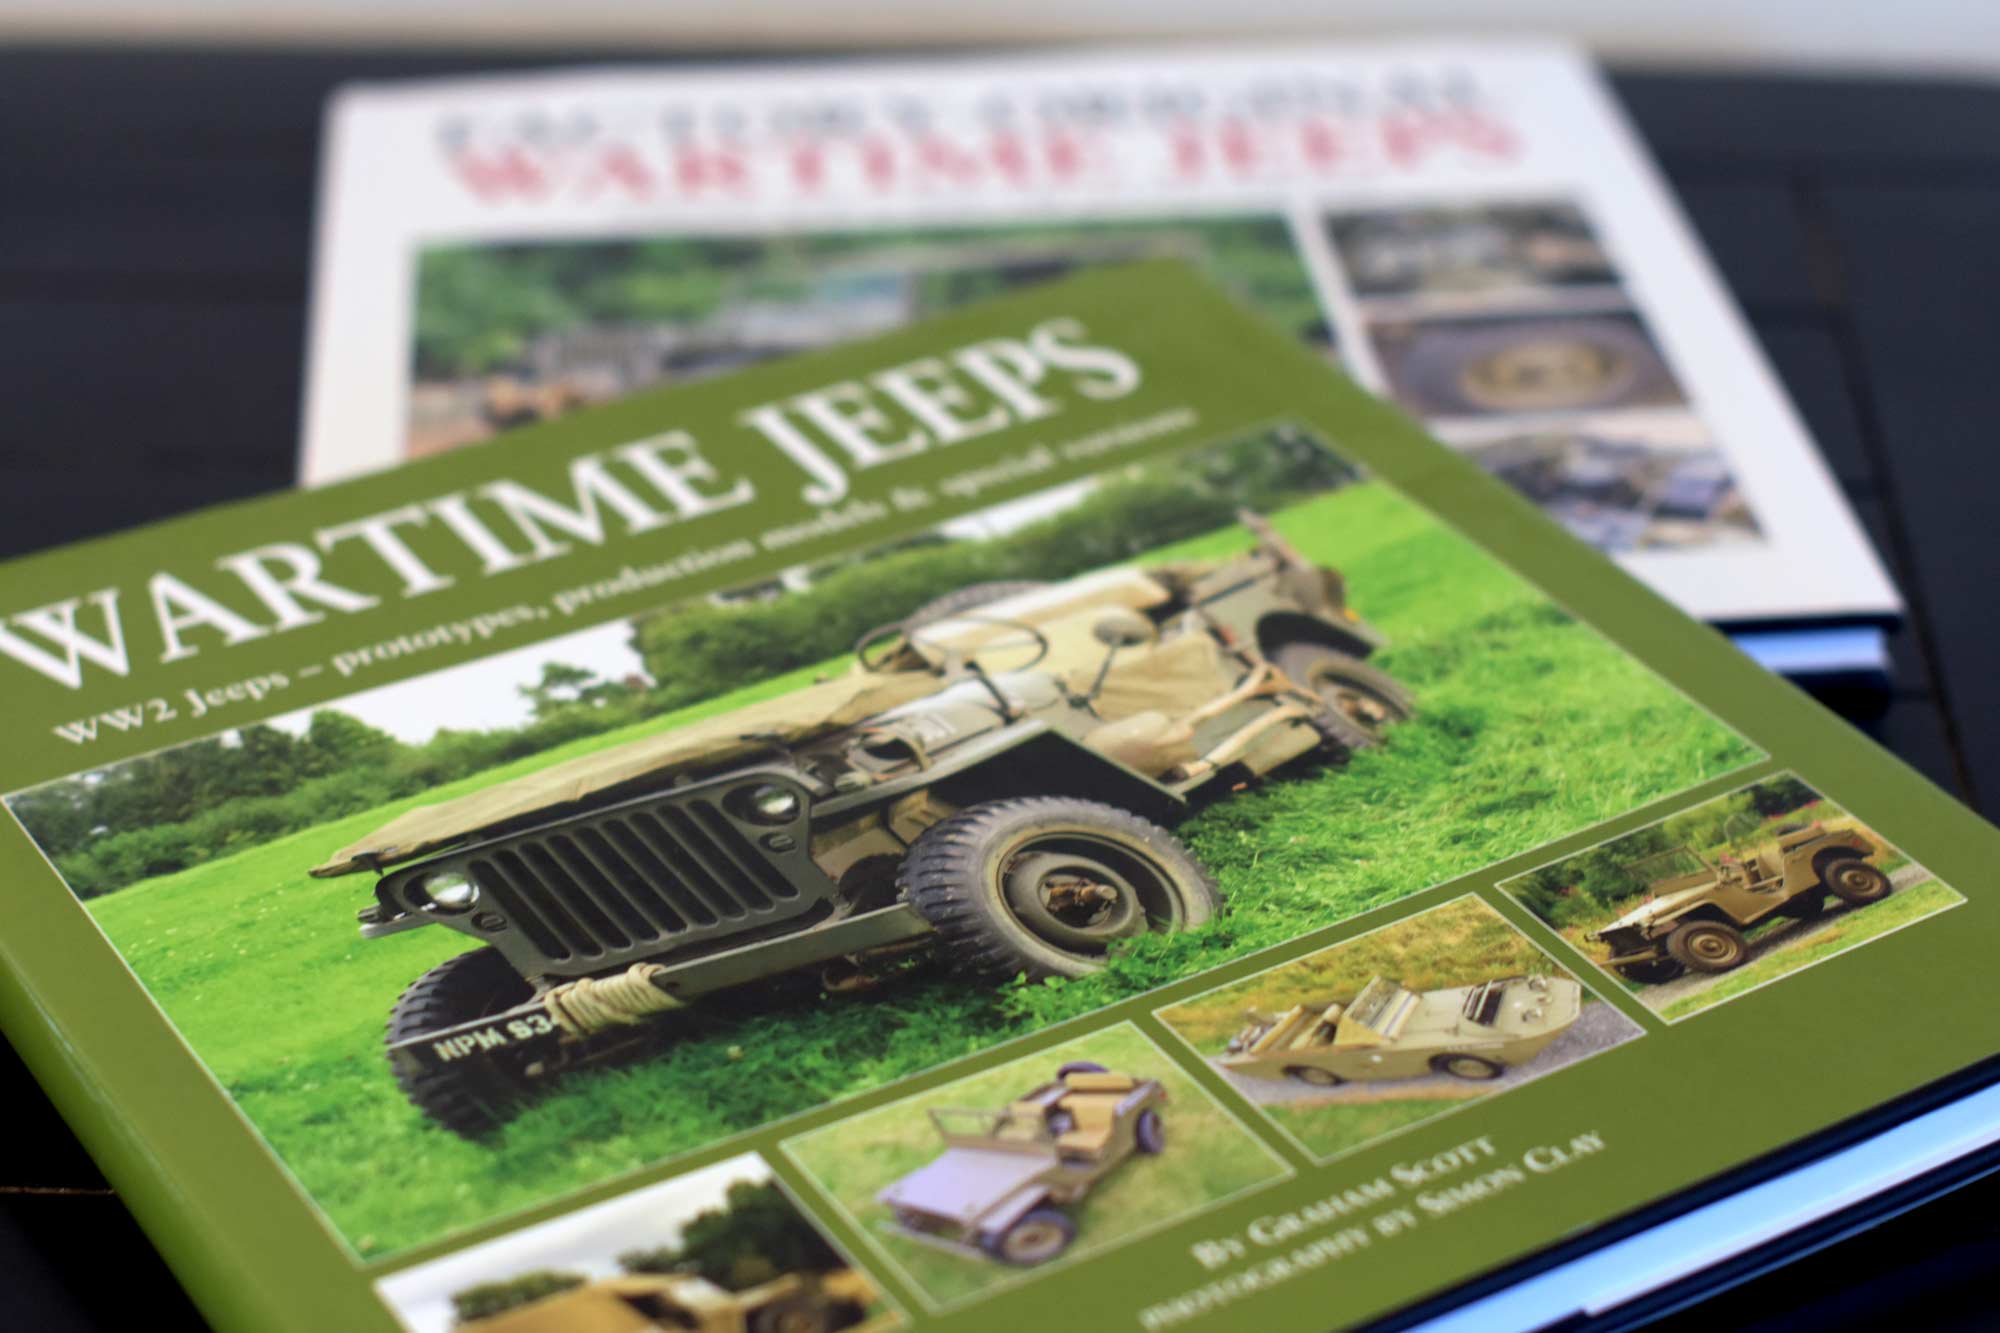 Two books, one out of focus vaguely with the title Wartime Jeeps, and the in-focus book in green also with the title Wartime Jeeps and WW2 jeeps also visible with a vehicle, the jeep, below in olive drab paint